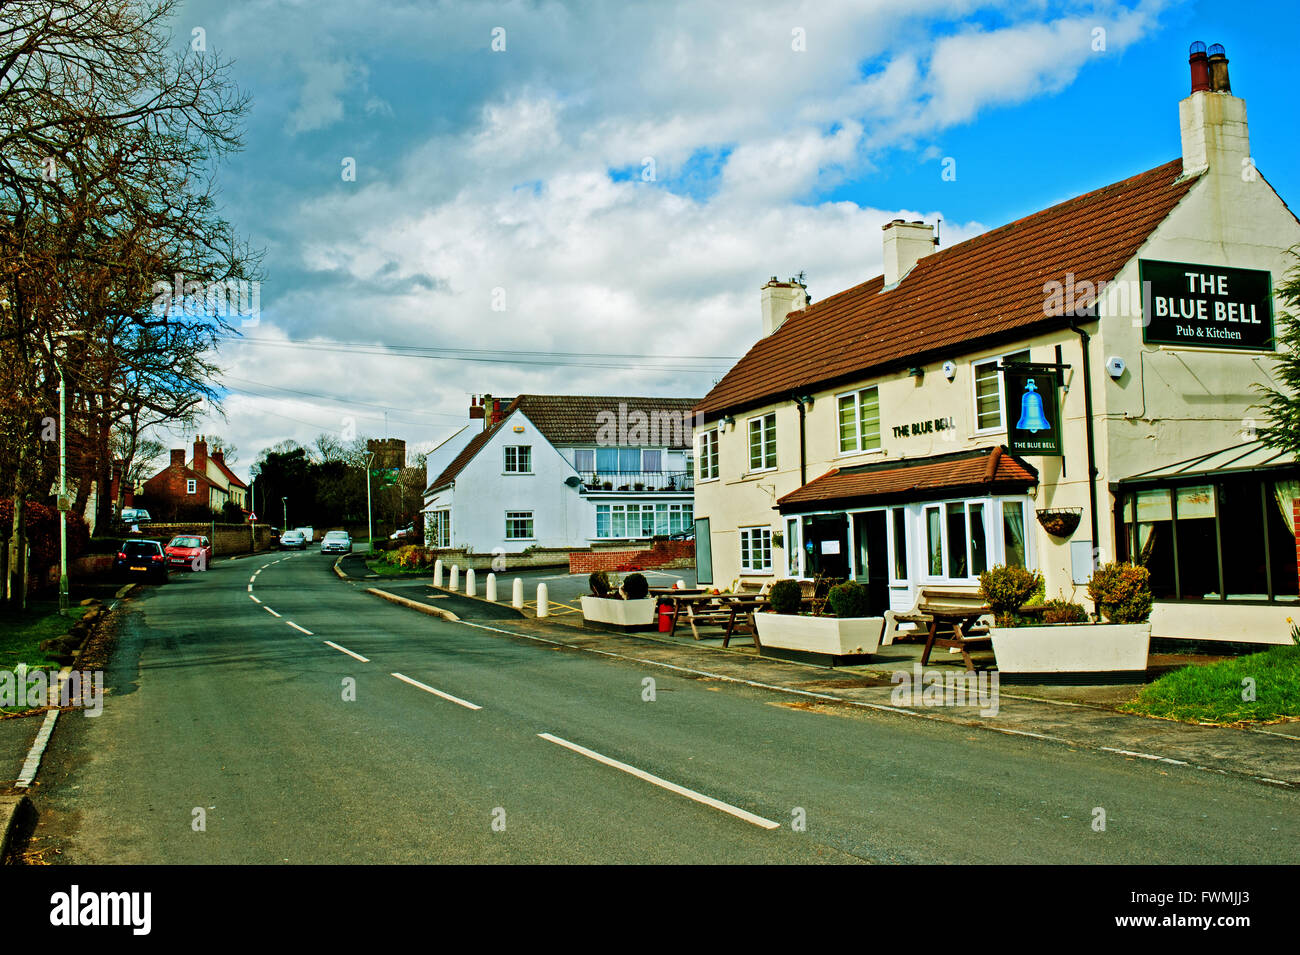 The Blue Bell, Bishopton Stock Photo